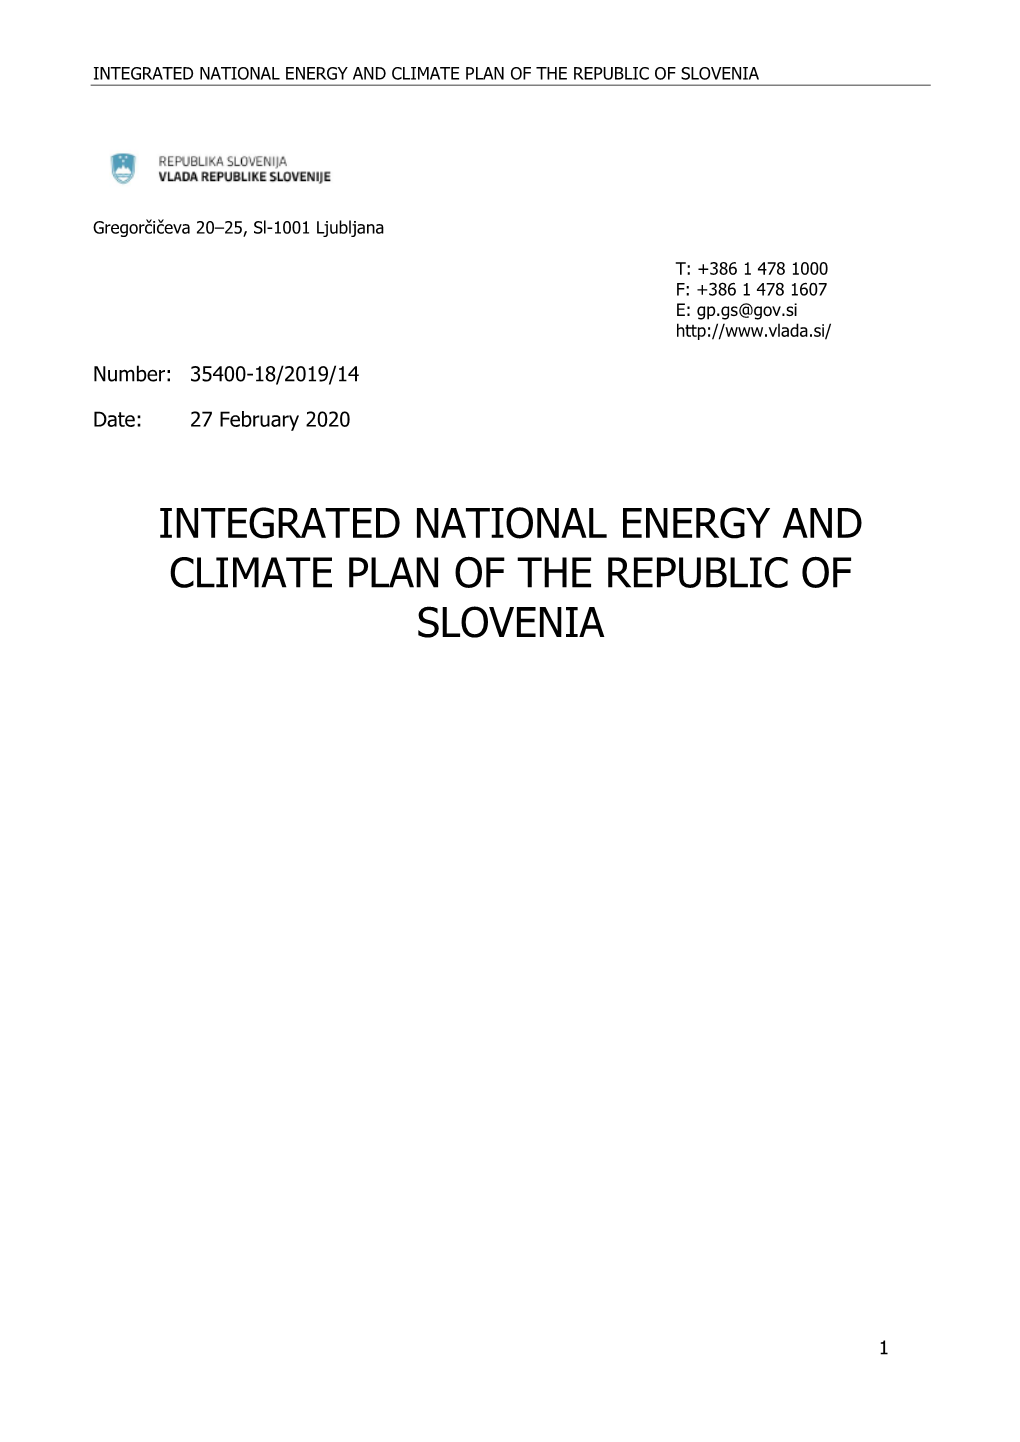 Integrated National Energy and Climate Plan of the Republic of Slovenia